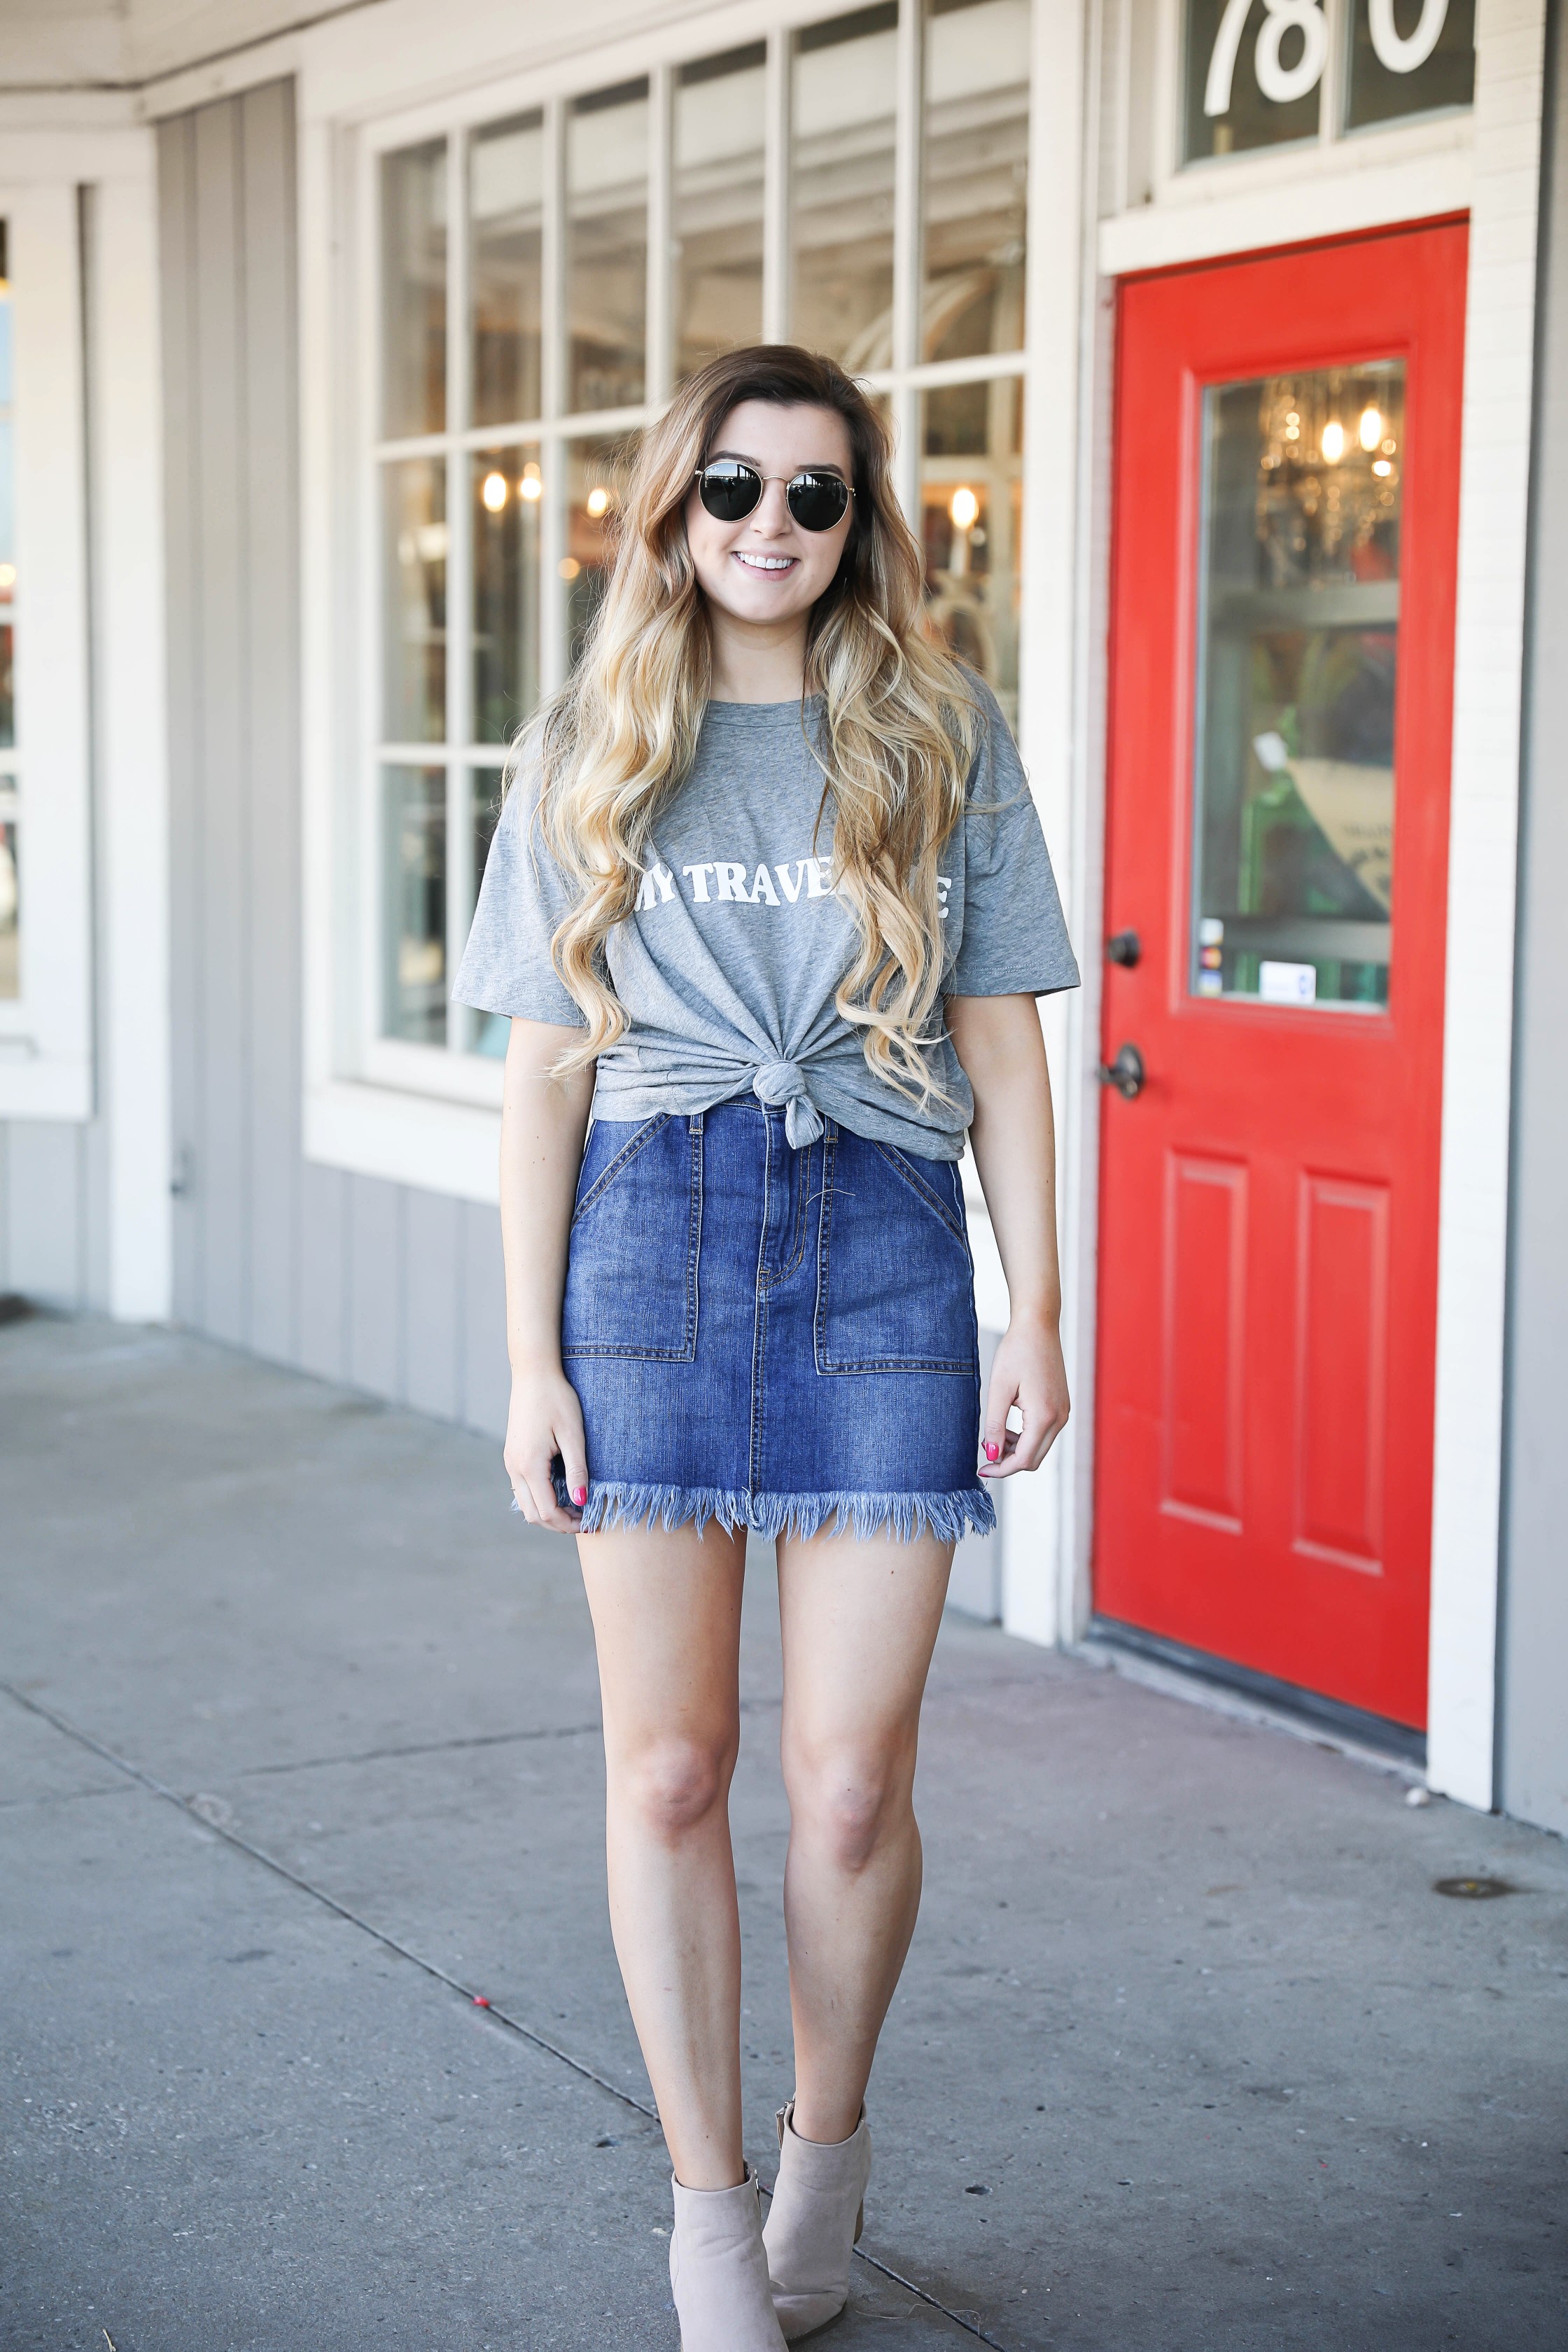 Show Me your mumu grey travel tee! This is such a cute travel tshirt! Not to mention, this jean skirt is adorable! I love how the jean skirt is frayed! Details on fashion blog daily dose of charm by lauren lindmark